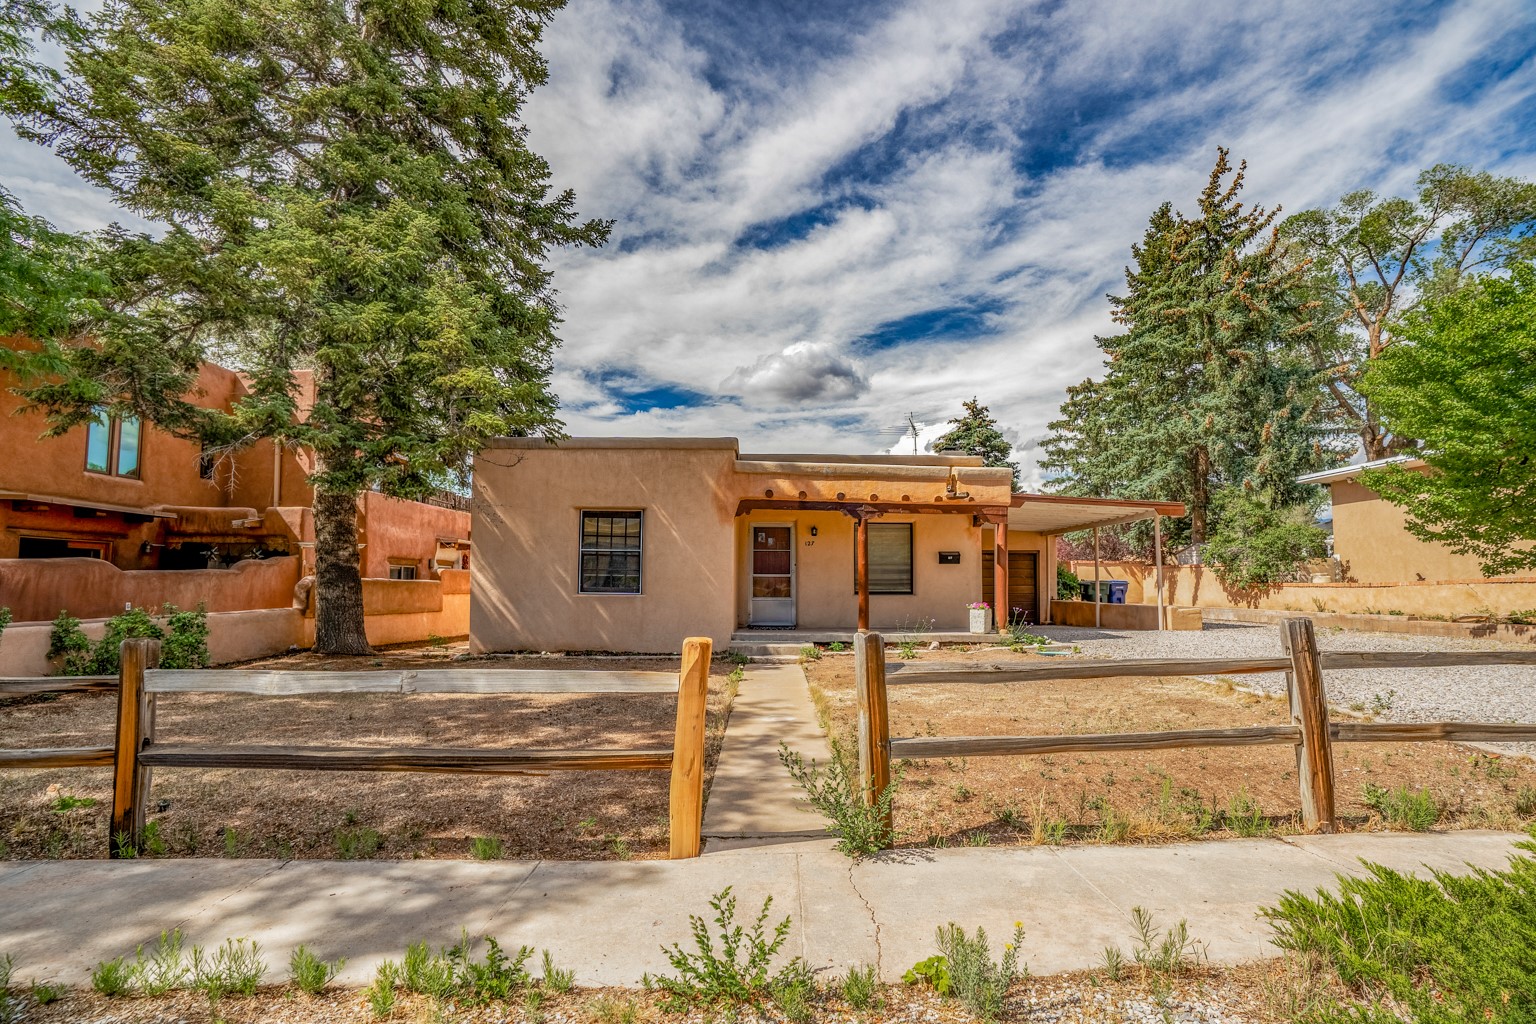 127 W Houghton, Santa Fe, New Mexico 87505, 3 Bedrooms Bedrooms, ,2 BathroomsBathrooms,Residential,For Sale,127 W Houghton,202232175